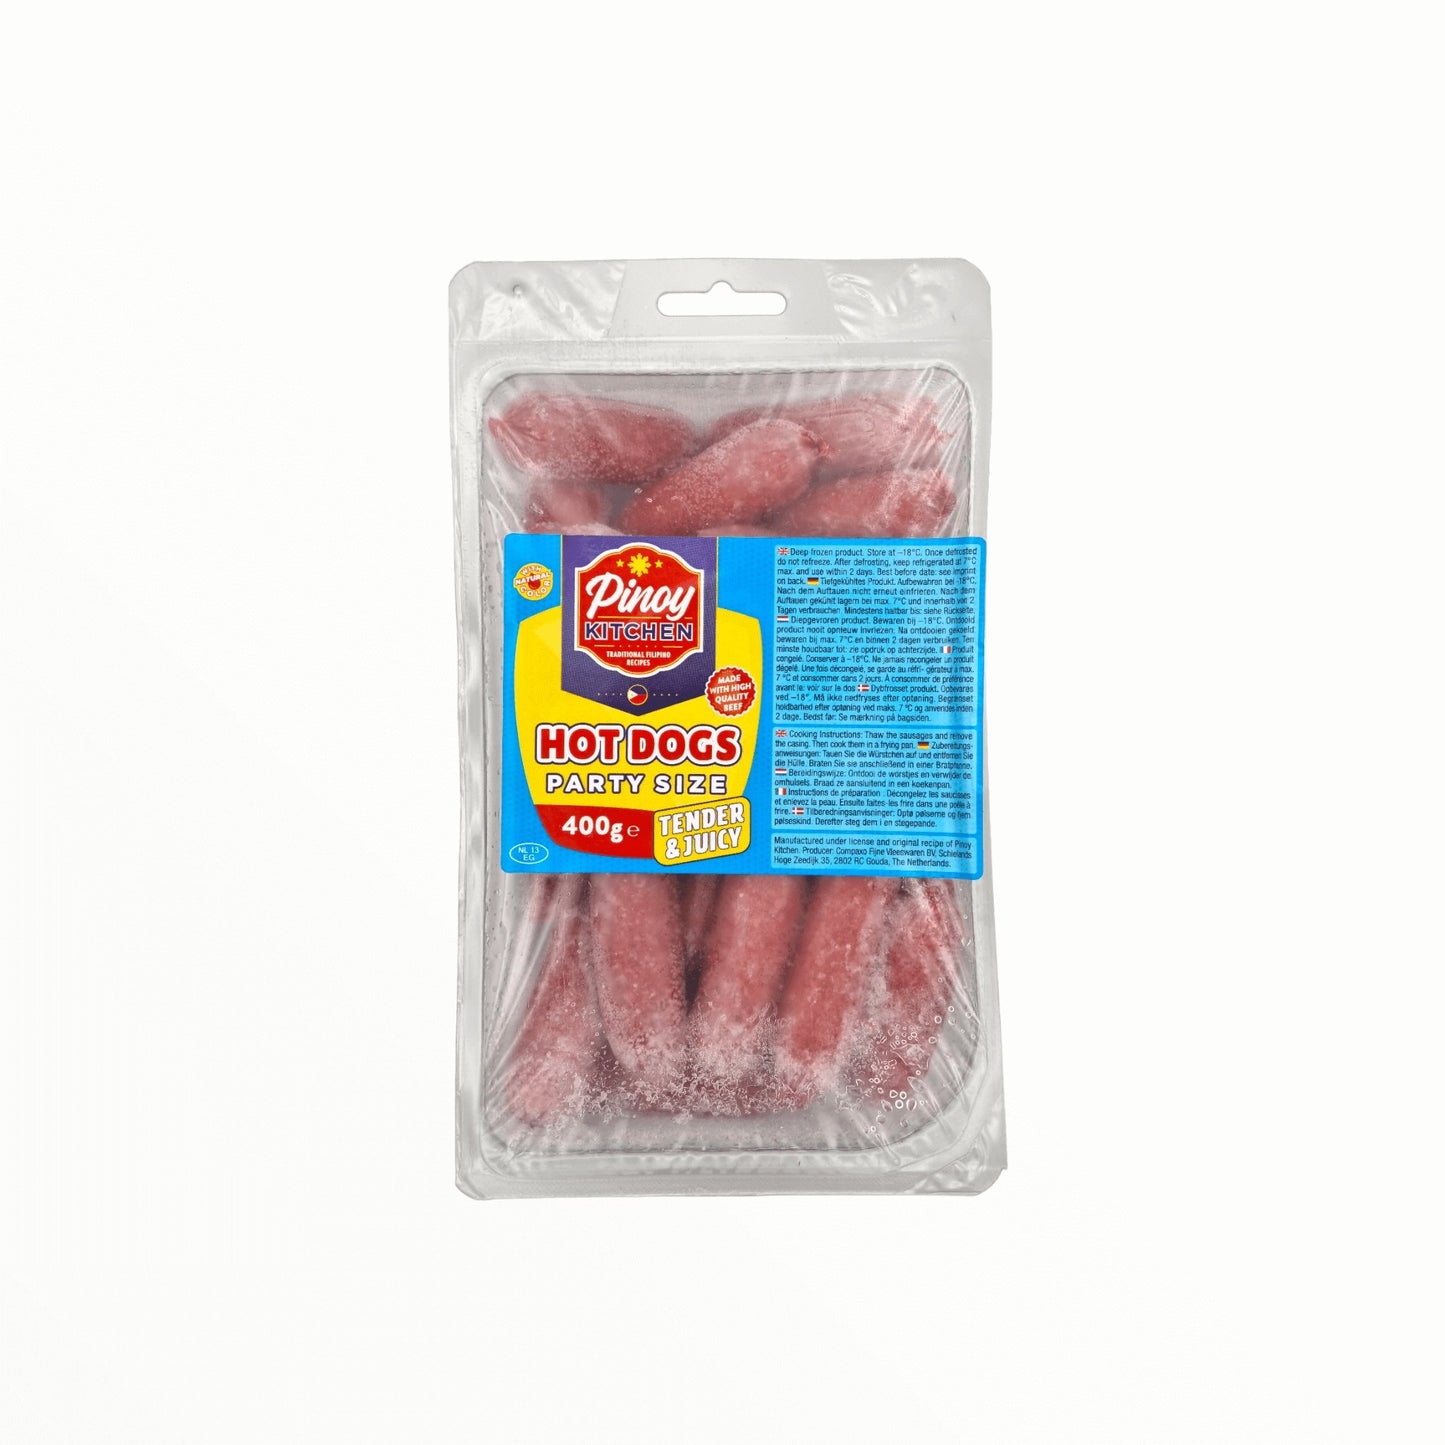 Party Hot Dogs Tender & Juicy 400g - Mabuhay Pinoy Asia Shop